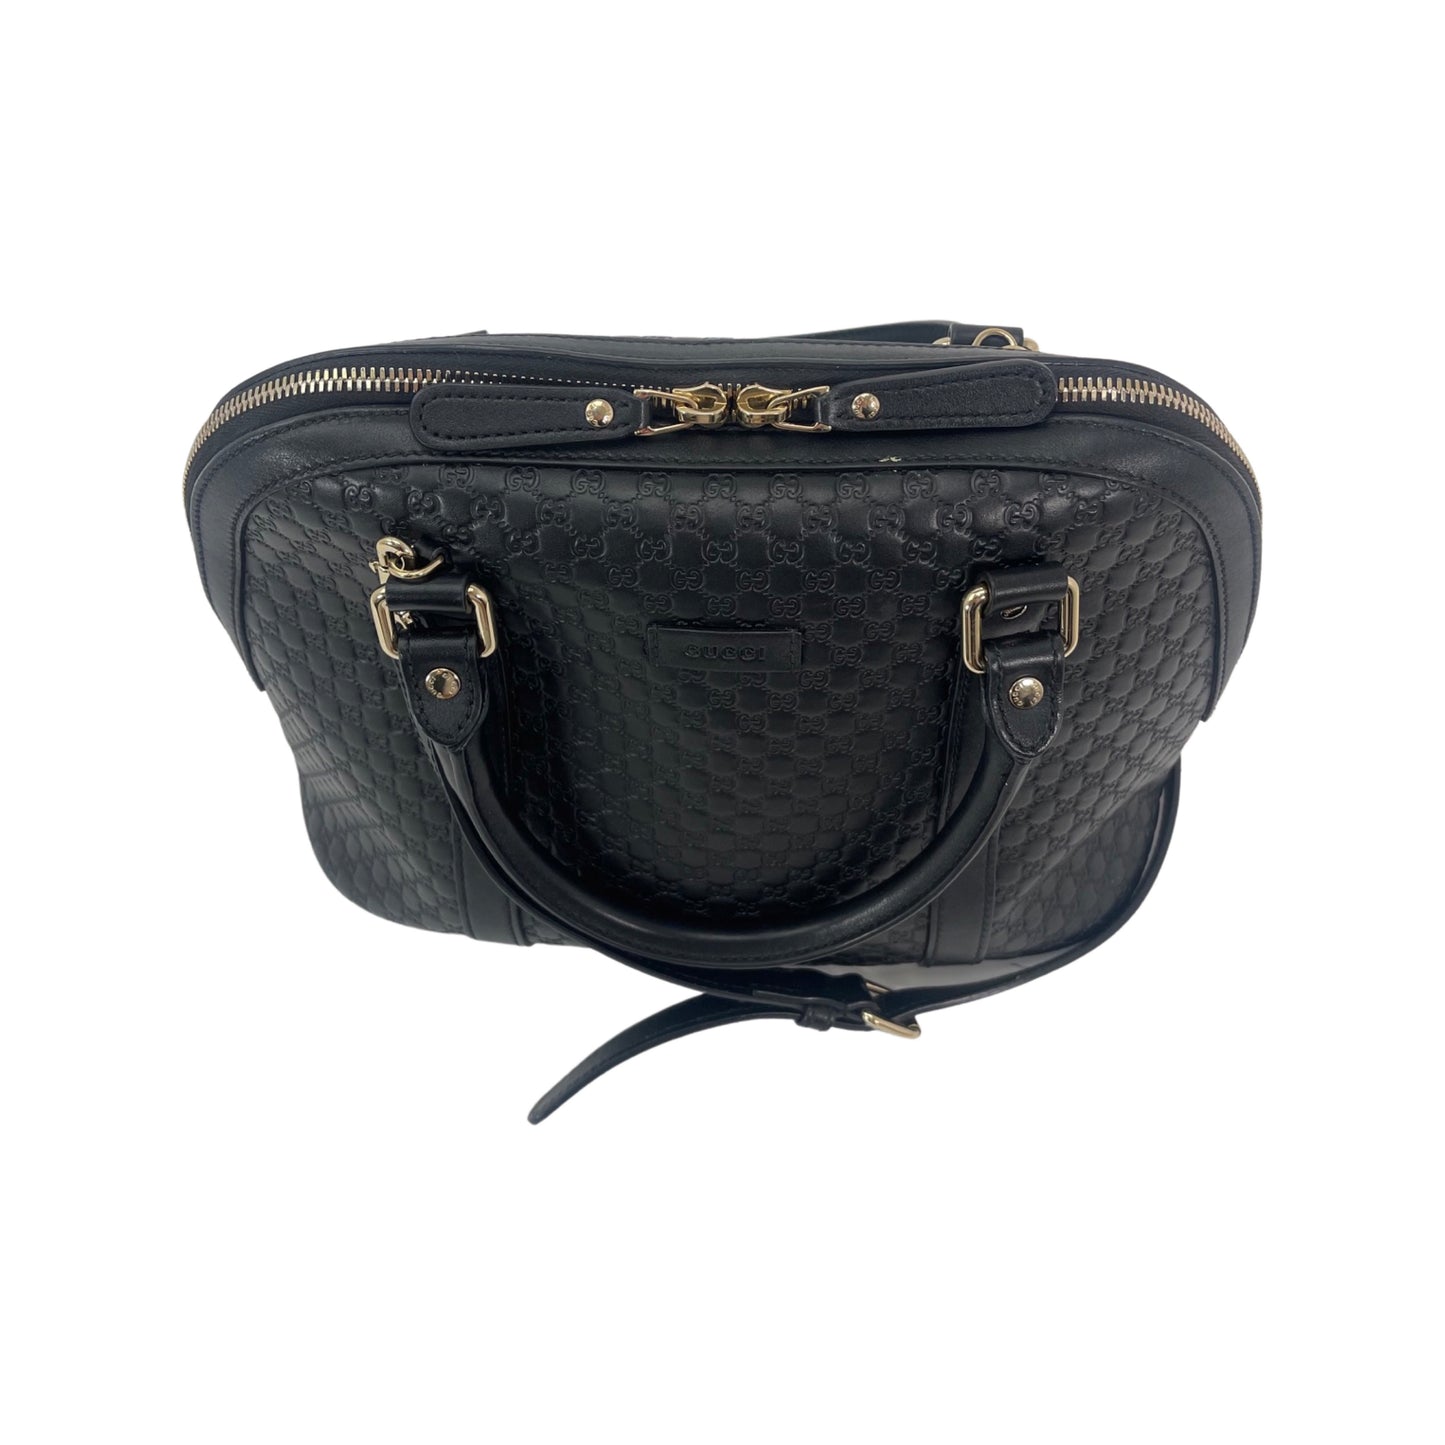 Gucci GG Signature Dome Handle Two-Way Bag